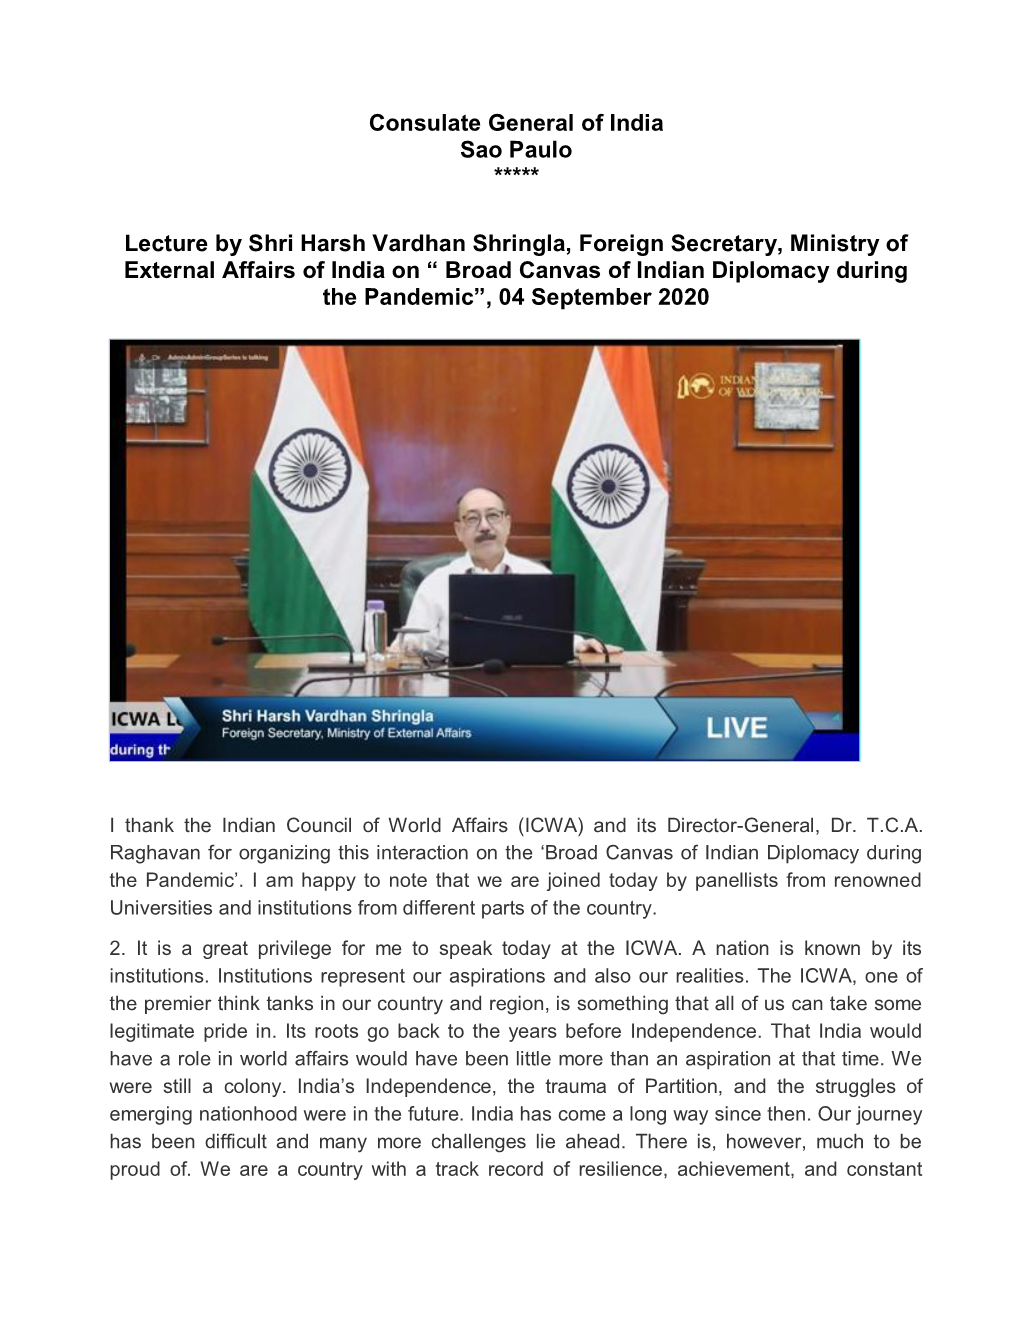 Lecture by Shri Harsh Vardhan Shringla, Foreign Secretary, Ministry of External Affairs of India On